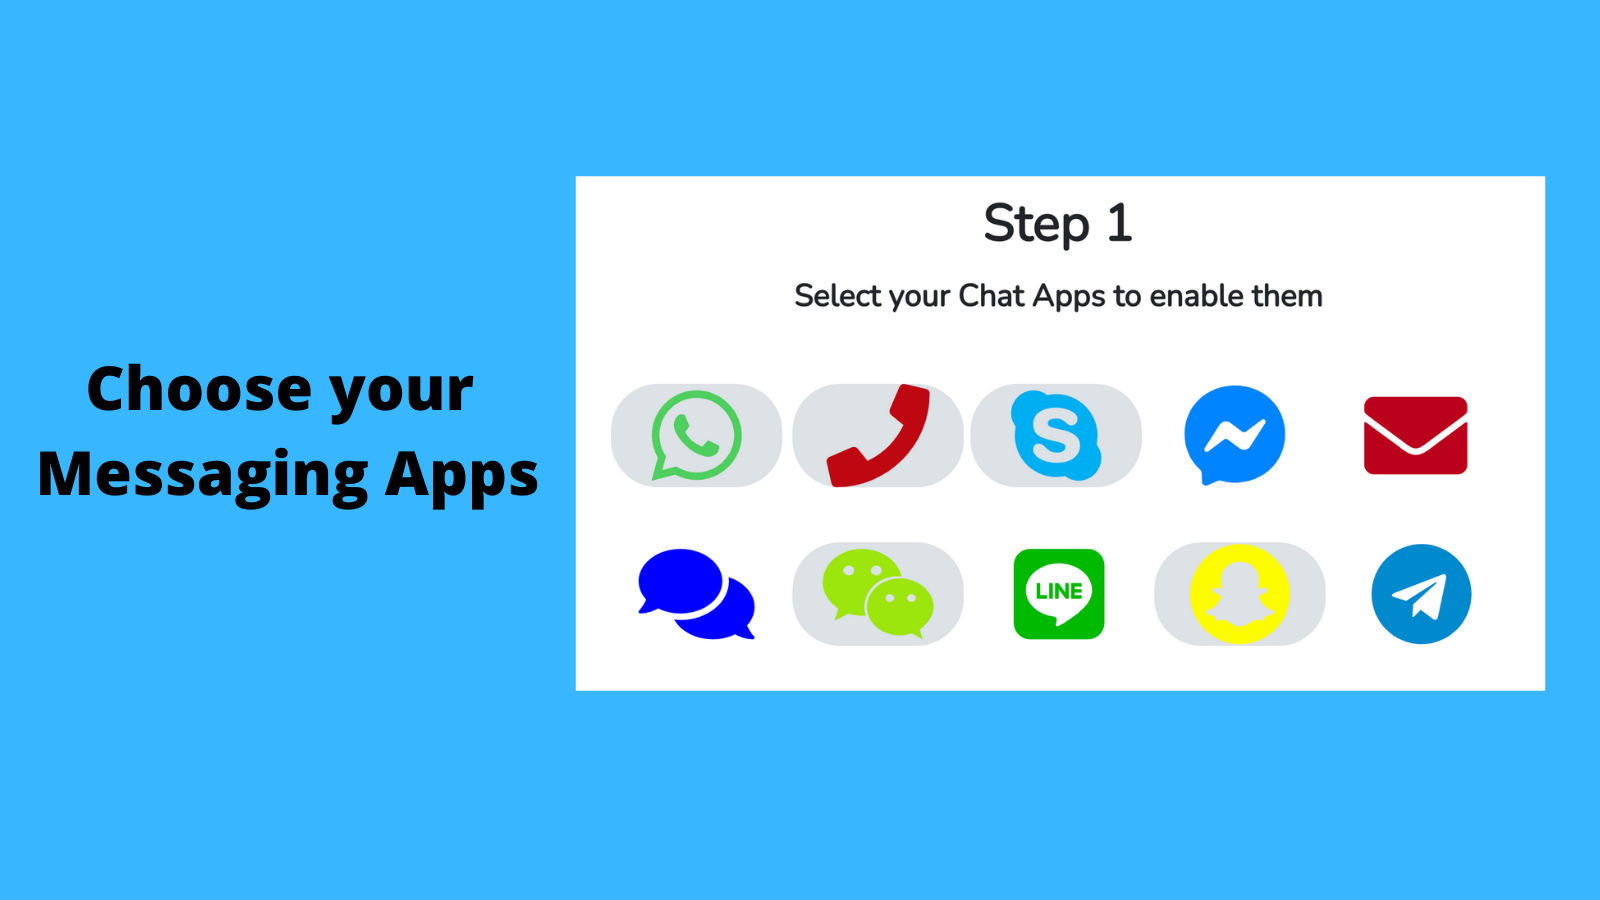 Choose your Messaging Apps